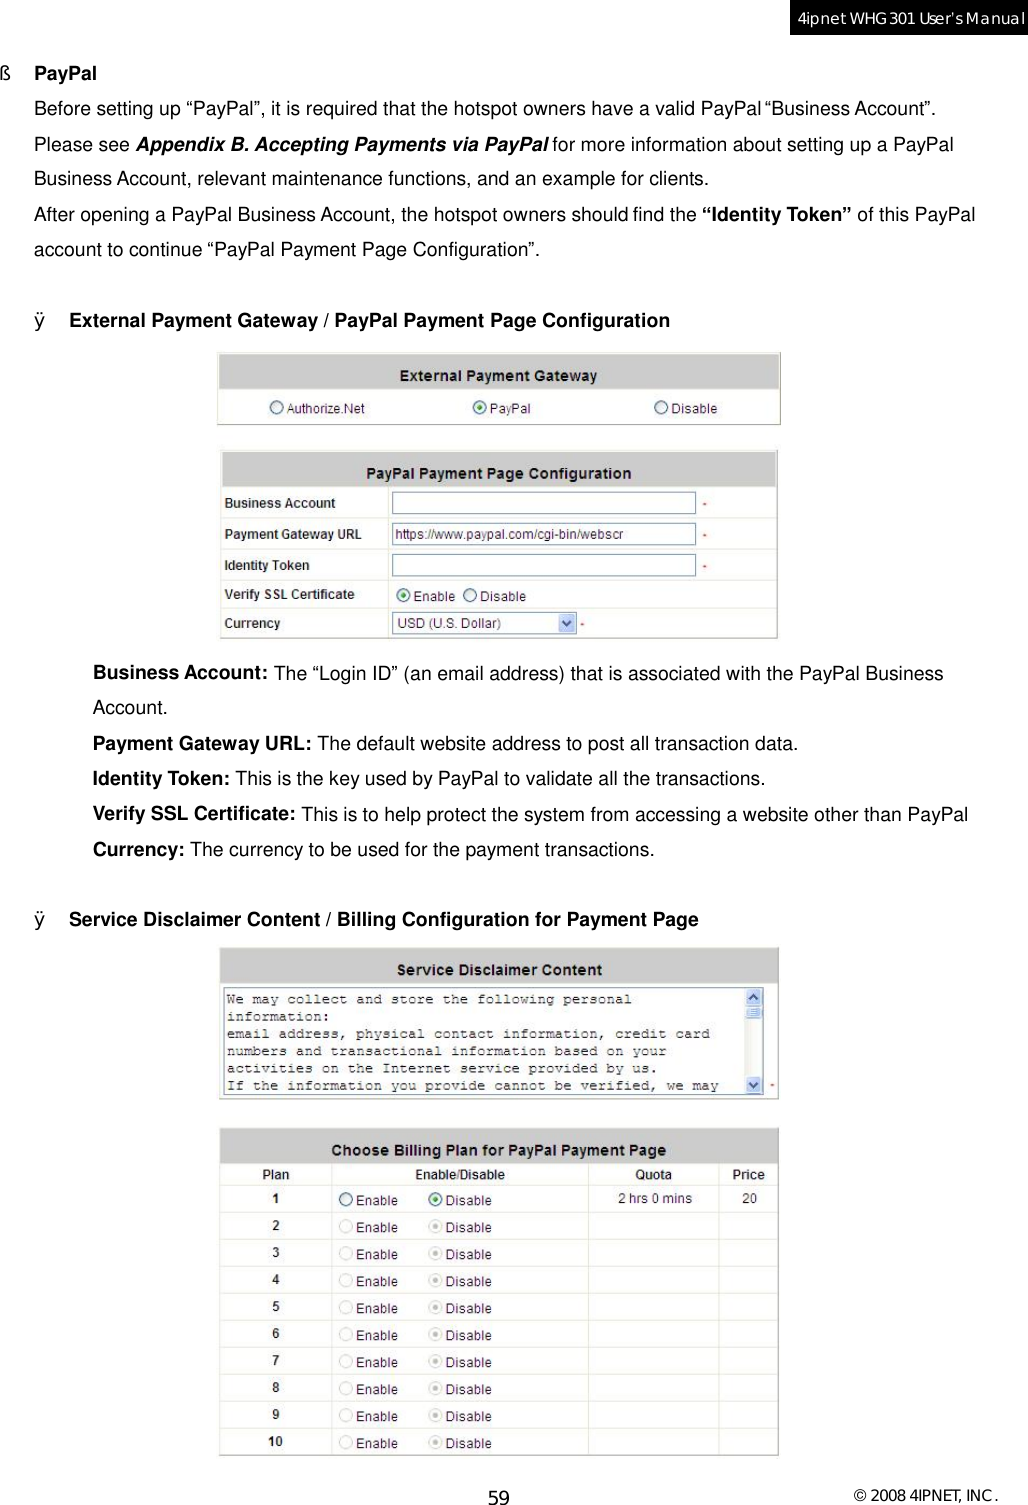  © 2008 4IPNET, INC. 59 4ipnet WHG301 User’s Manual  §  PayPal Before setting up “PayPal”, it is required that the hotspot owners have a valid PayPal “Business Account”. Please see Appendix B. Accepting Payments via PayPal for more information about setting up a PayPal Business Account, relevant maintenance functions, and an example for clients. After opening a PayPal Business Account, the hotspot owners should find the “Identity Token” of this PayPal account to continue “PayPal Payment Page Configuration”.    Ø External Payment Gateway / PayPal Payment Page Configuration  Business Account: The “Login ID” (an email address) that is associated with the PayPal Business Account. Payment Gateway URL: The default website address to post all transaction data. Identity Token: This is the key used by PayPal to validate all the transactions. Verify SSL Certificate: This is to help protect the system from accessing a website other than PayPal Currency: The currency to be used for the payment transactions.  Ø Service Disclaimer Content / Billing Configuration for Payment Page  